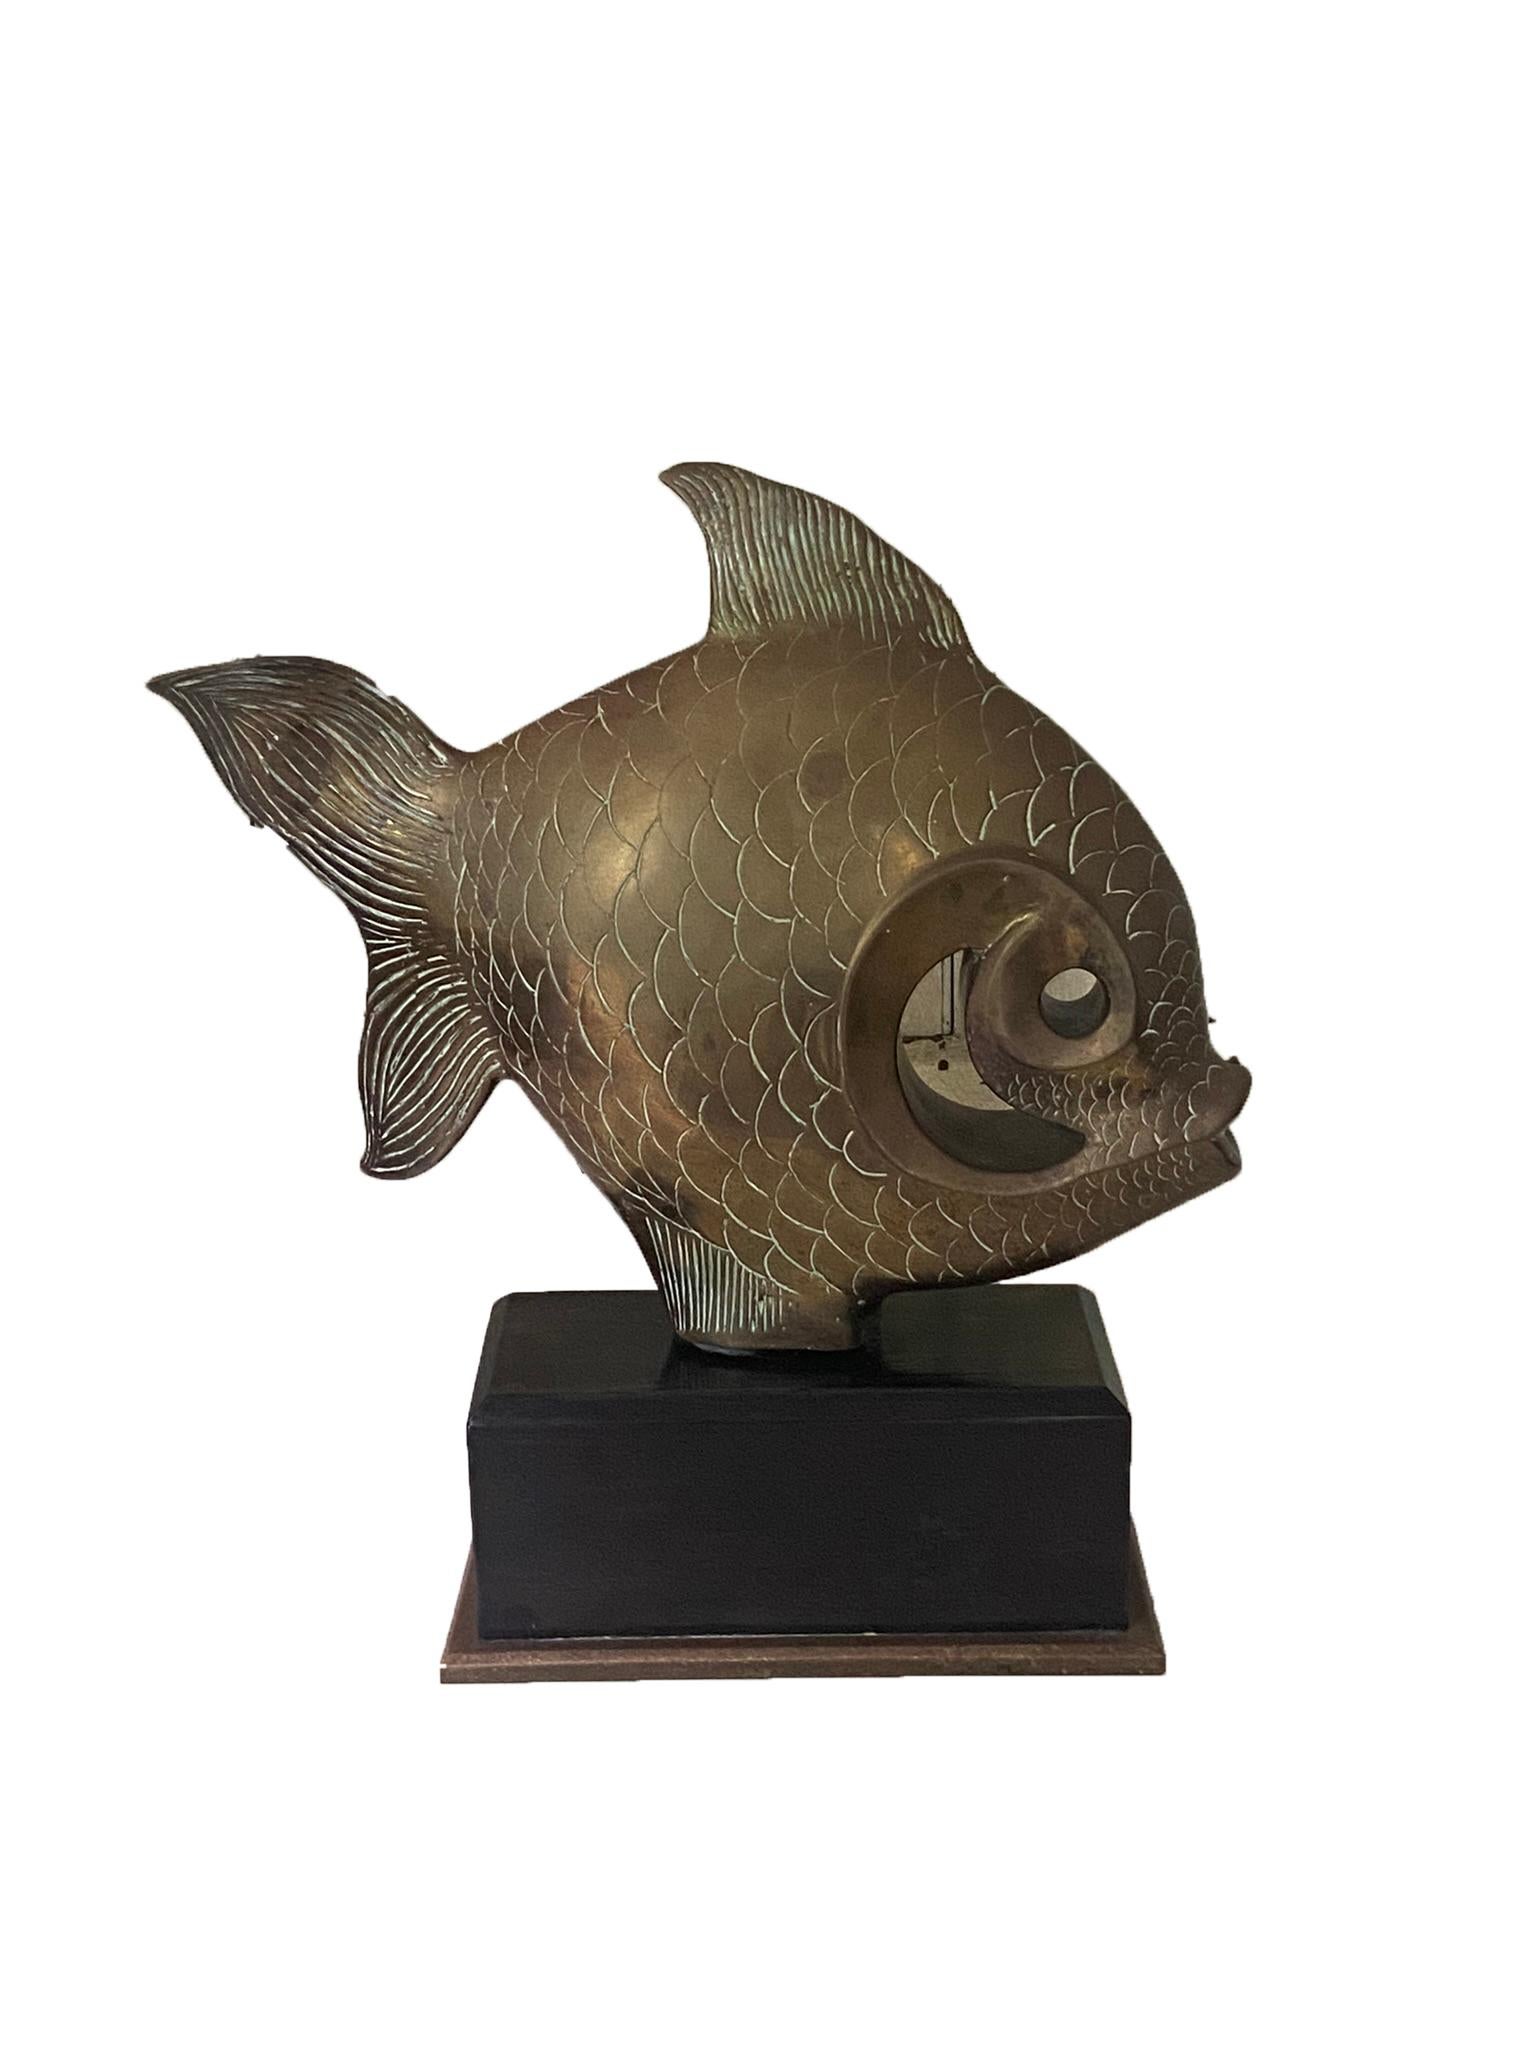 20th Century Vintage Bronze or Brass Fish Sculpture on Wooden Base 1980s For Sale